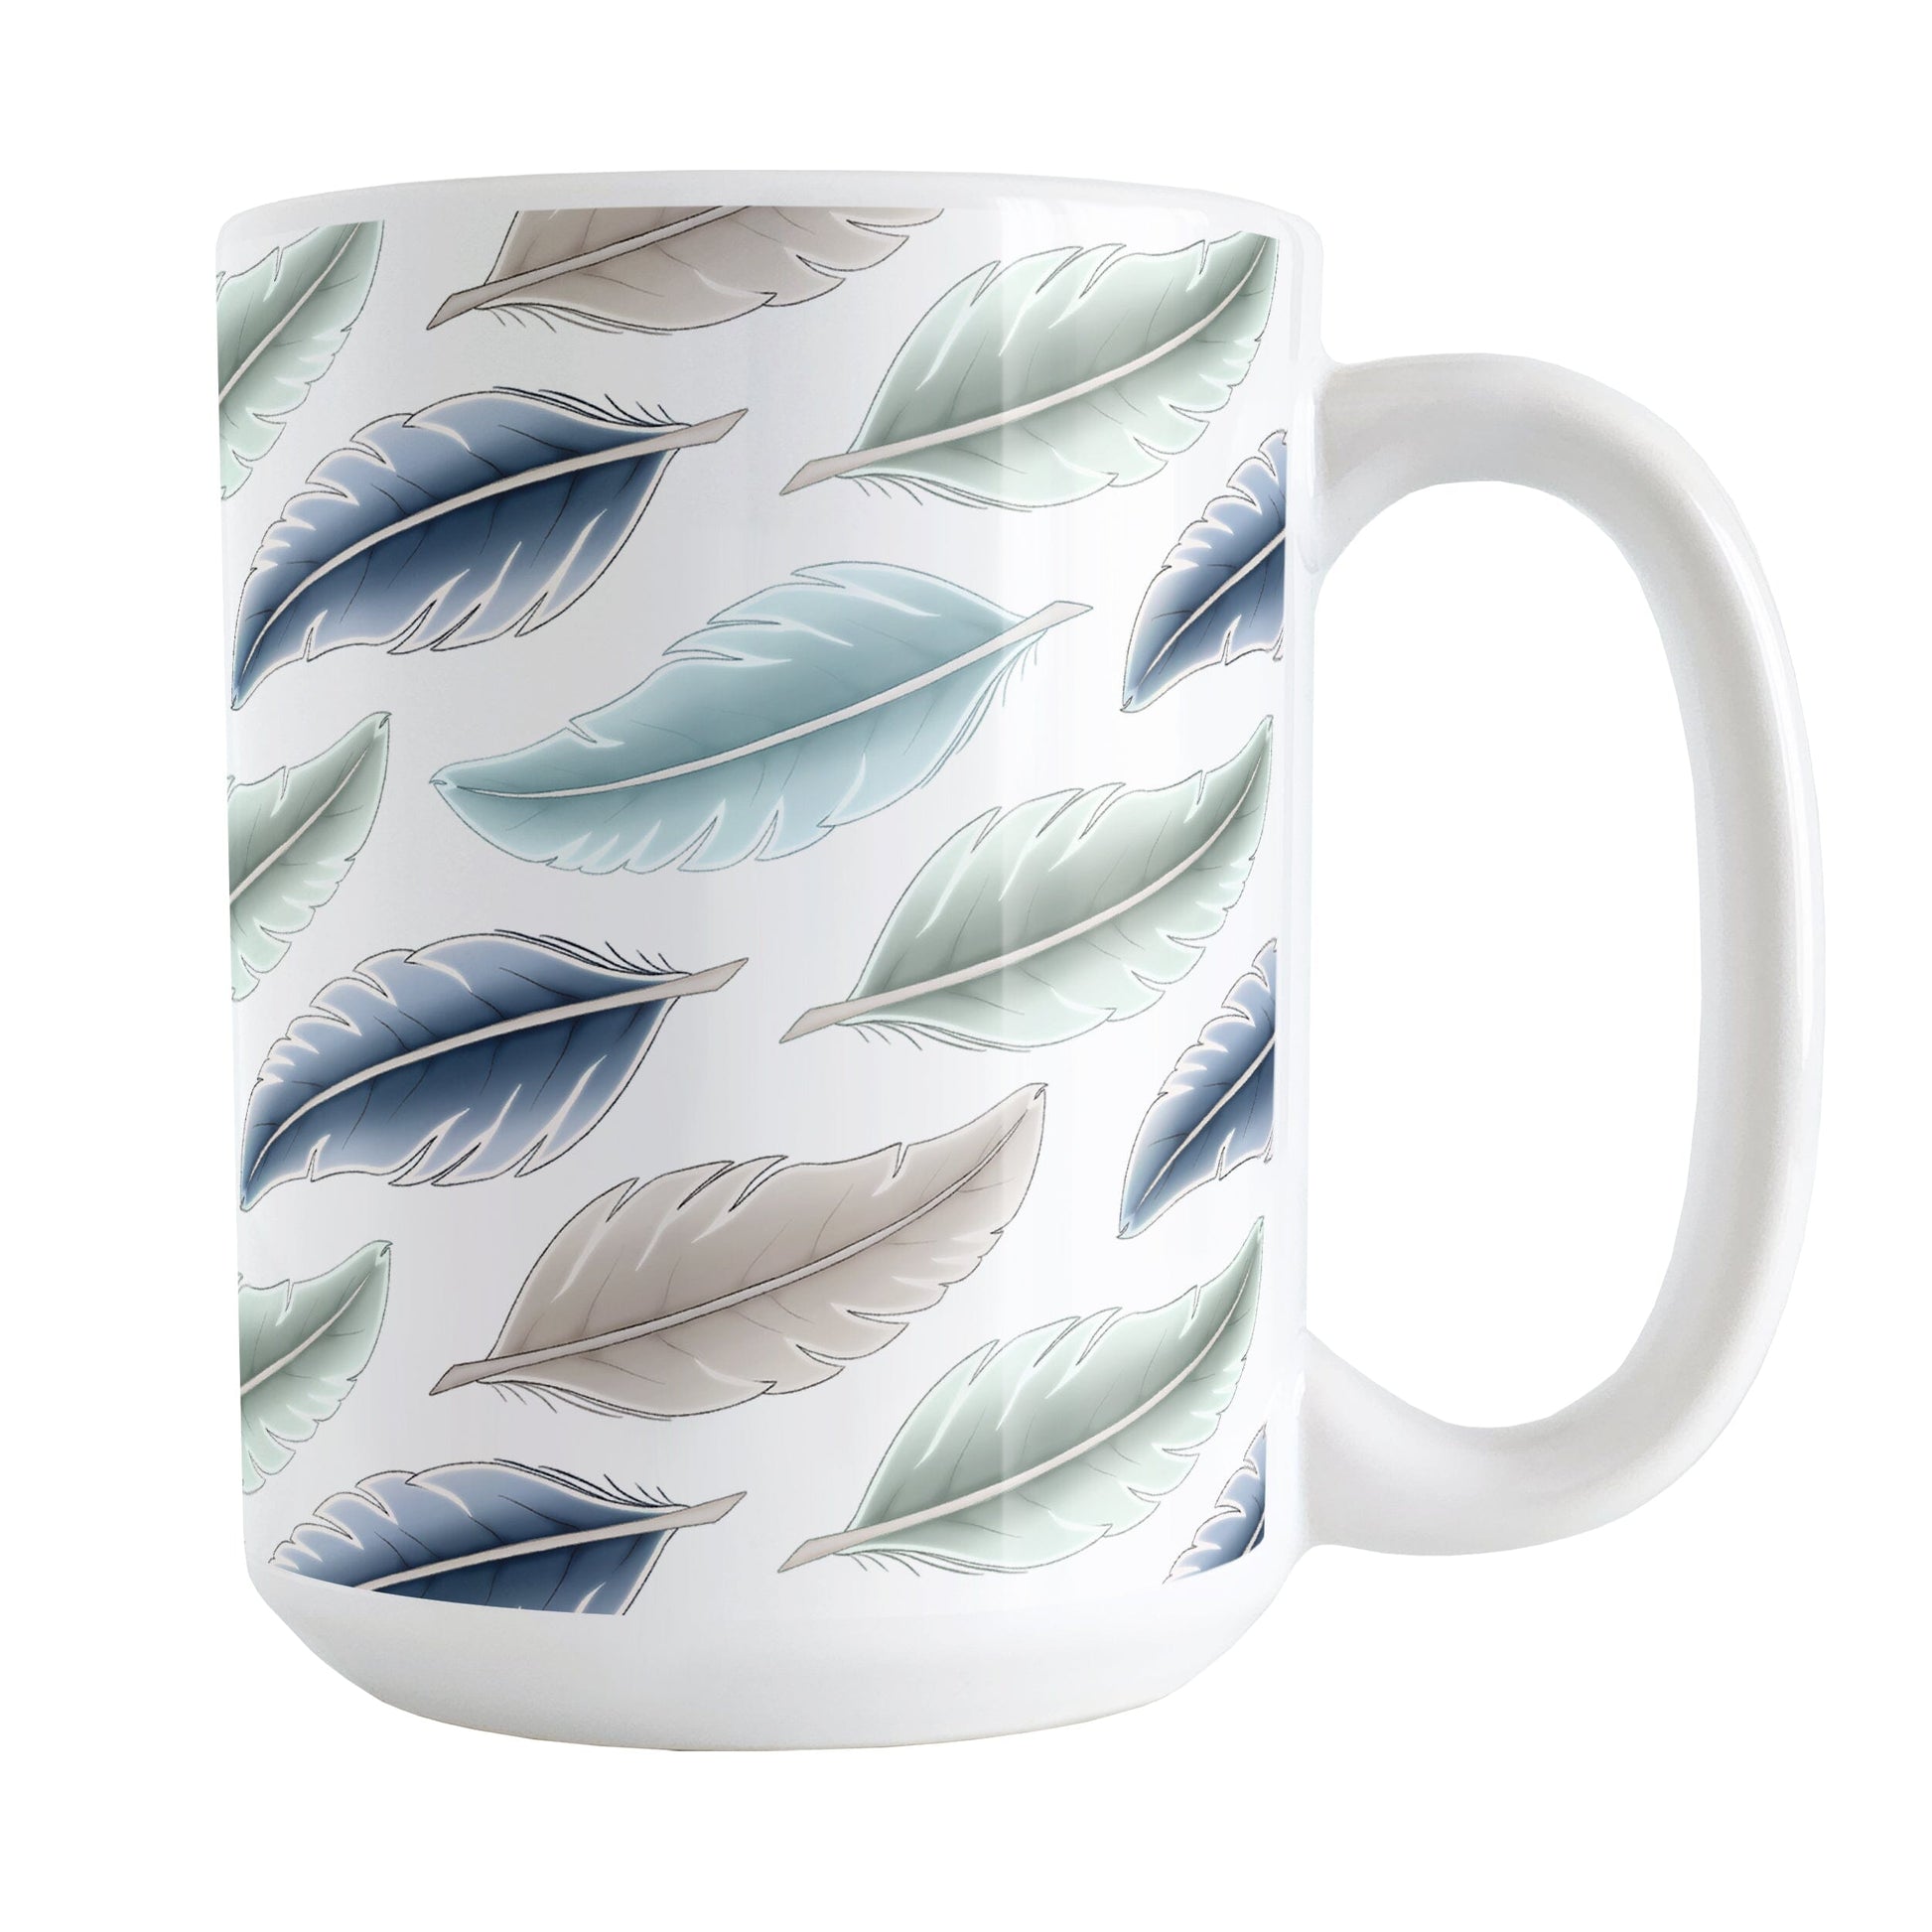 Coastal Feathers Mug (15oz) at Amy's Coffee Mugs. A ceramic coffee mug designed with a pattern of feathers in a coastal color scheme that wraps around the mug to the handle.